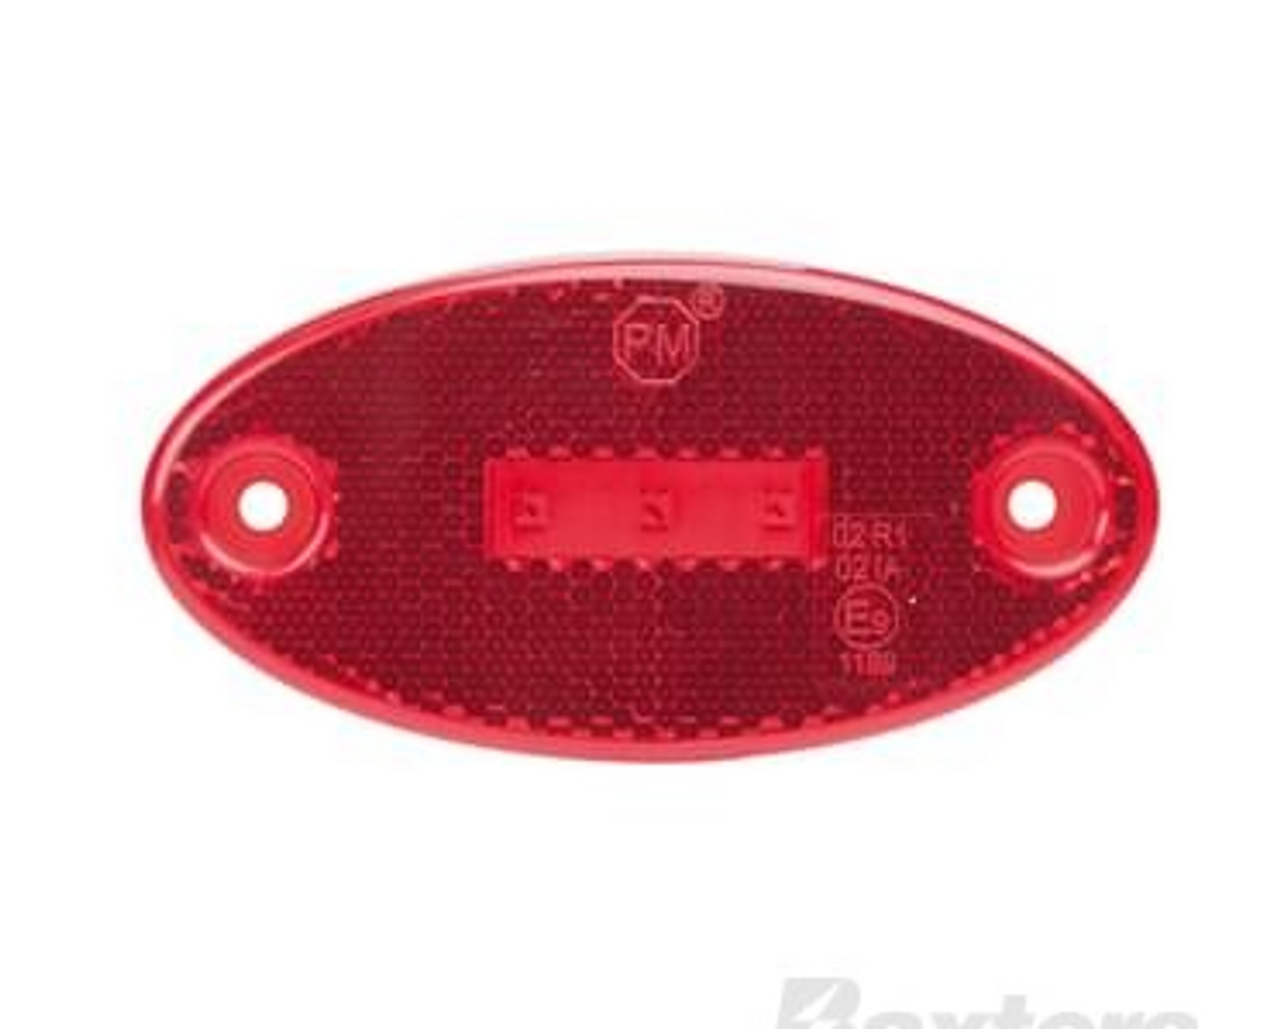 1200R - LED Marker Light Red. Oval. Surface Mount. Multi-Volt. Water & Dust Proof. Low Profile with In-Built Reflective Lens. Peterson. RV. Ultimate LED. 